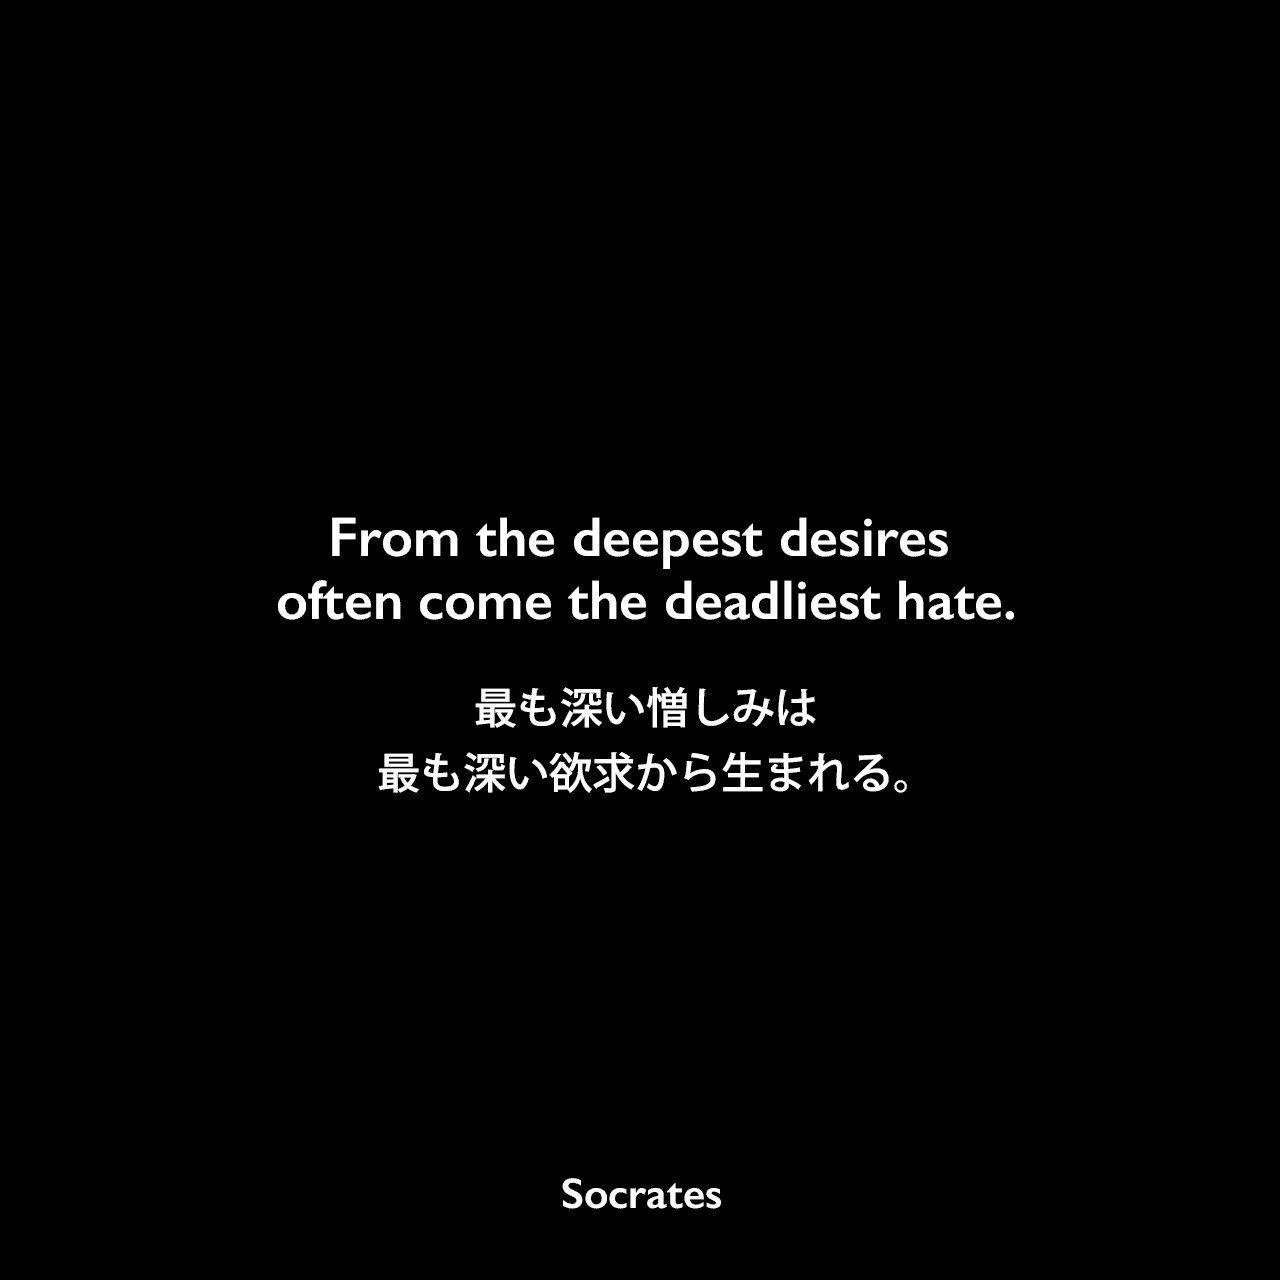 From the deepest desires often come the deadliest hate.最も深い憎しみは、最も深い欲求から生まれる。Socrates